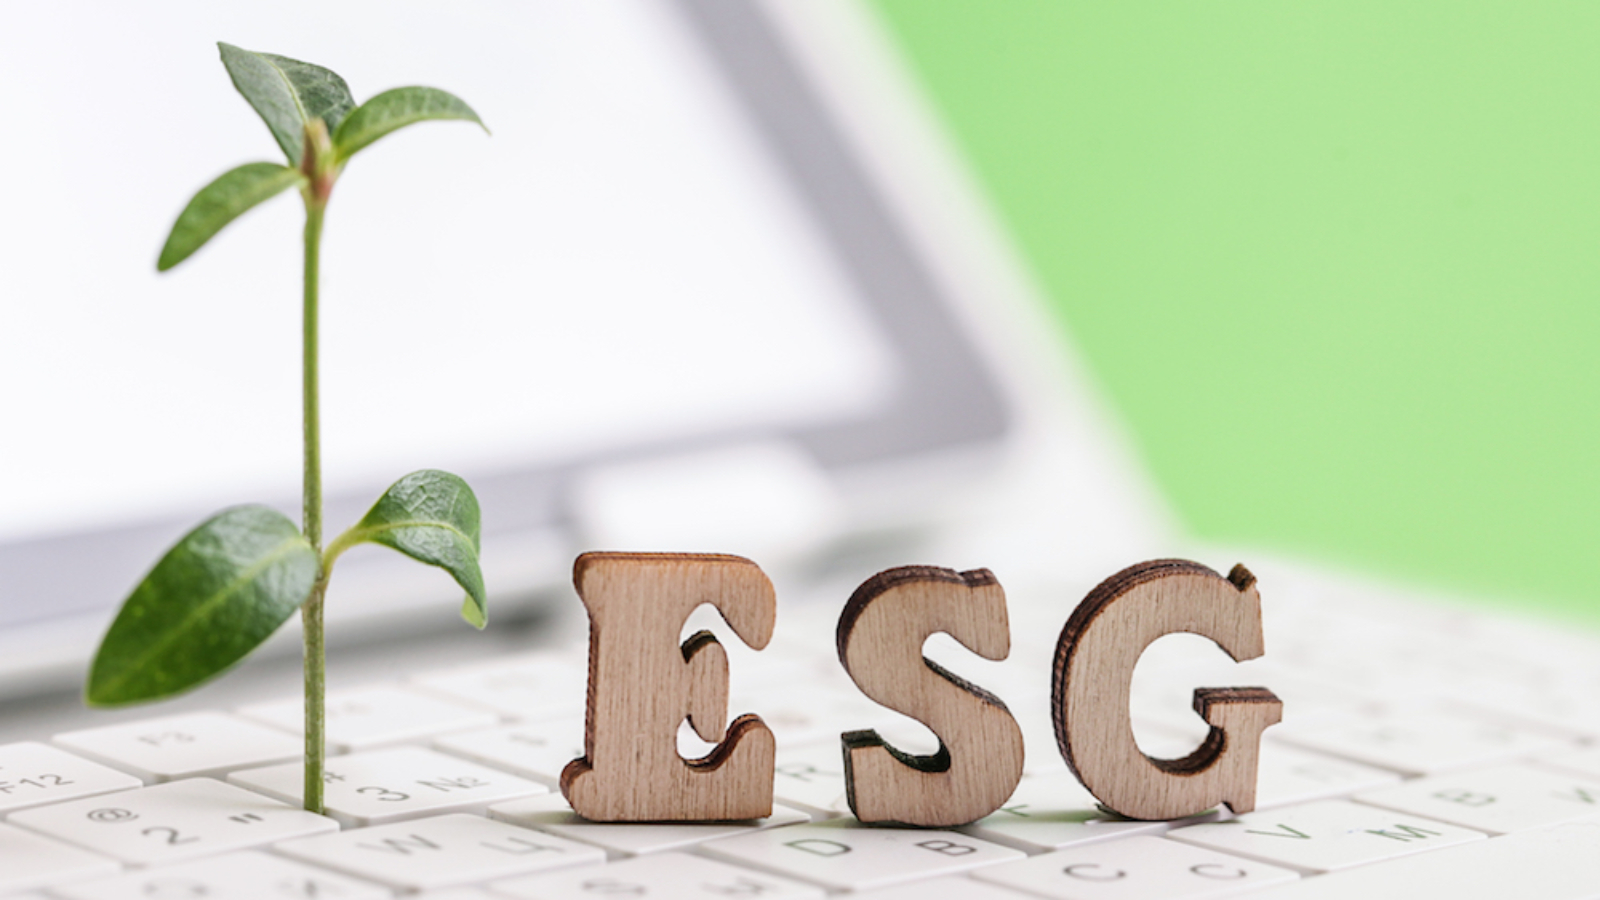 ESG, white computer keyboard, green background. Environmental, Social, Corporate Governance. Socially Responsible Investing. Concept Sustainably. Green investing